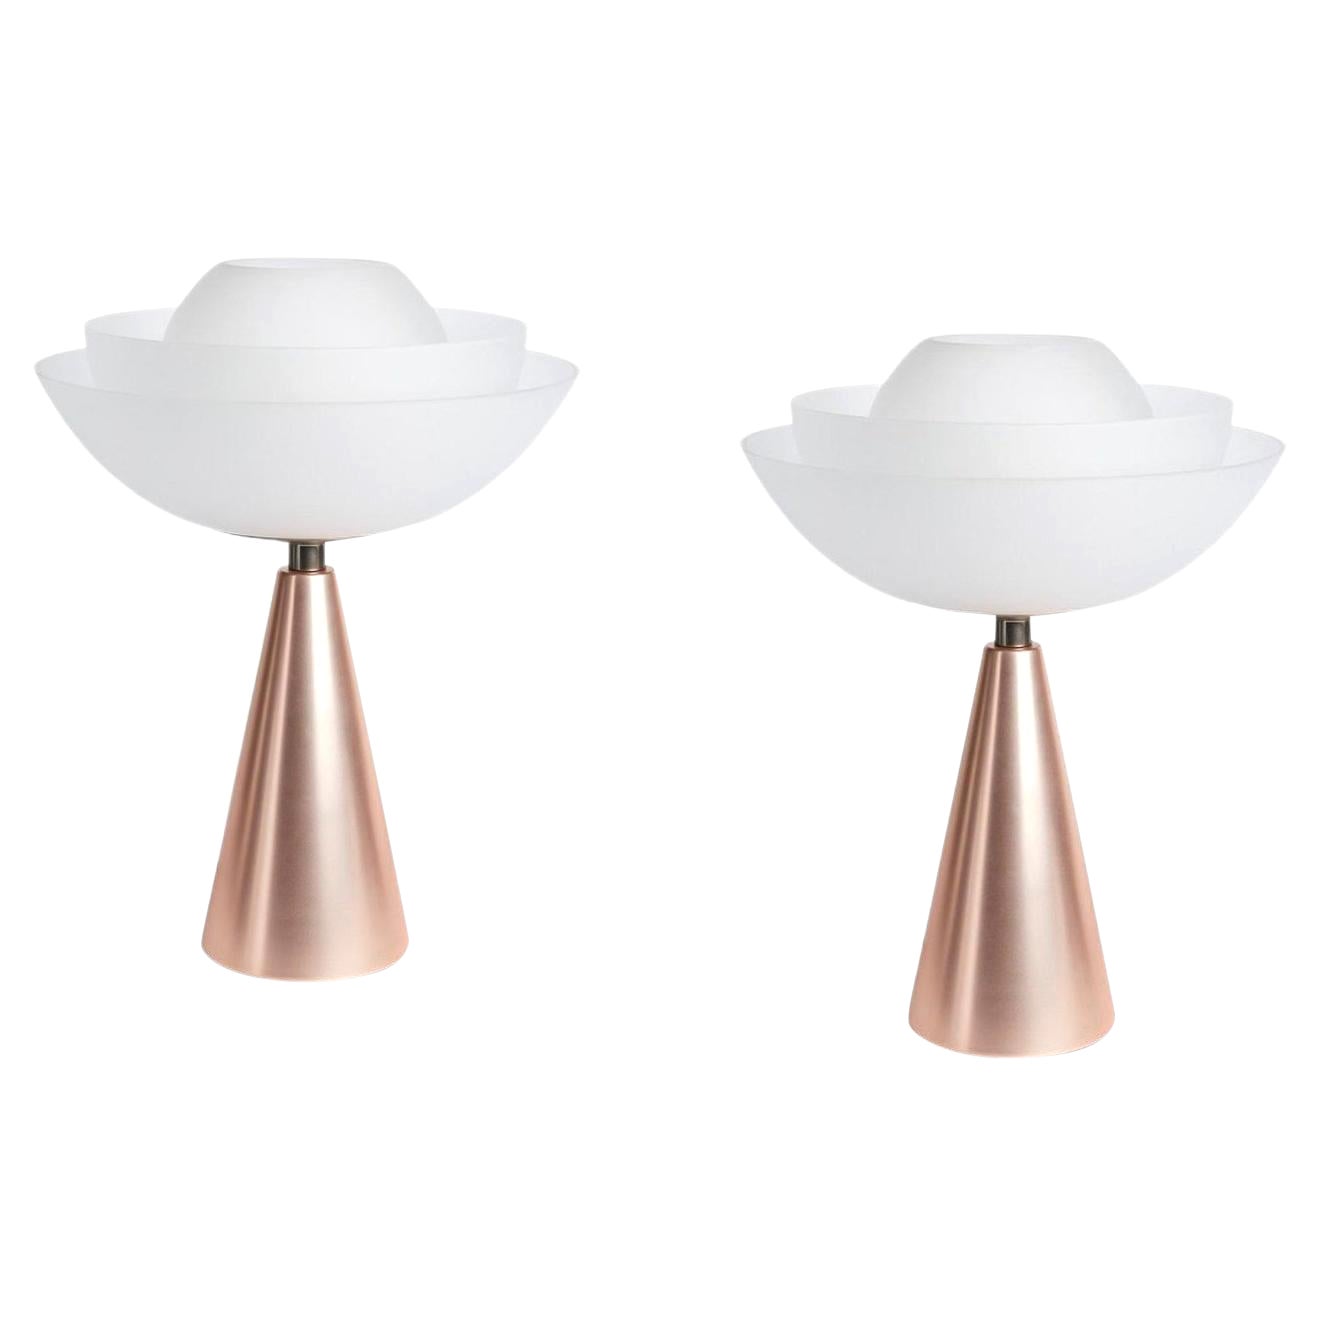 Pair of Lotus Table Lamps by Mason Editions